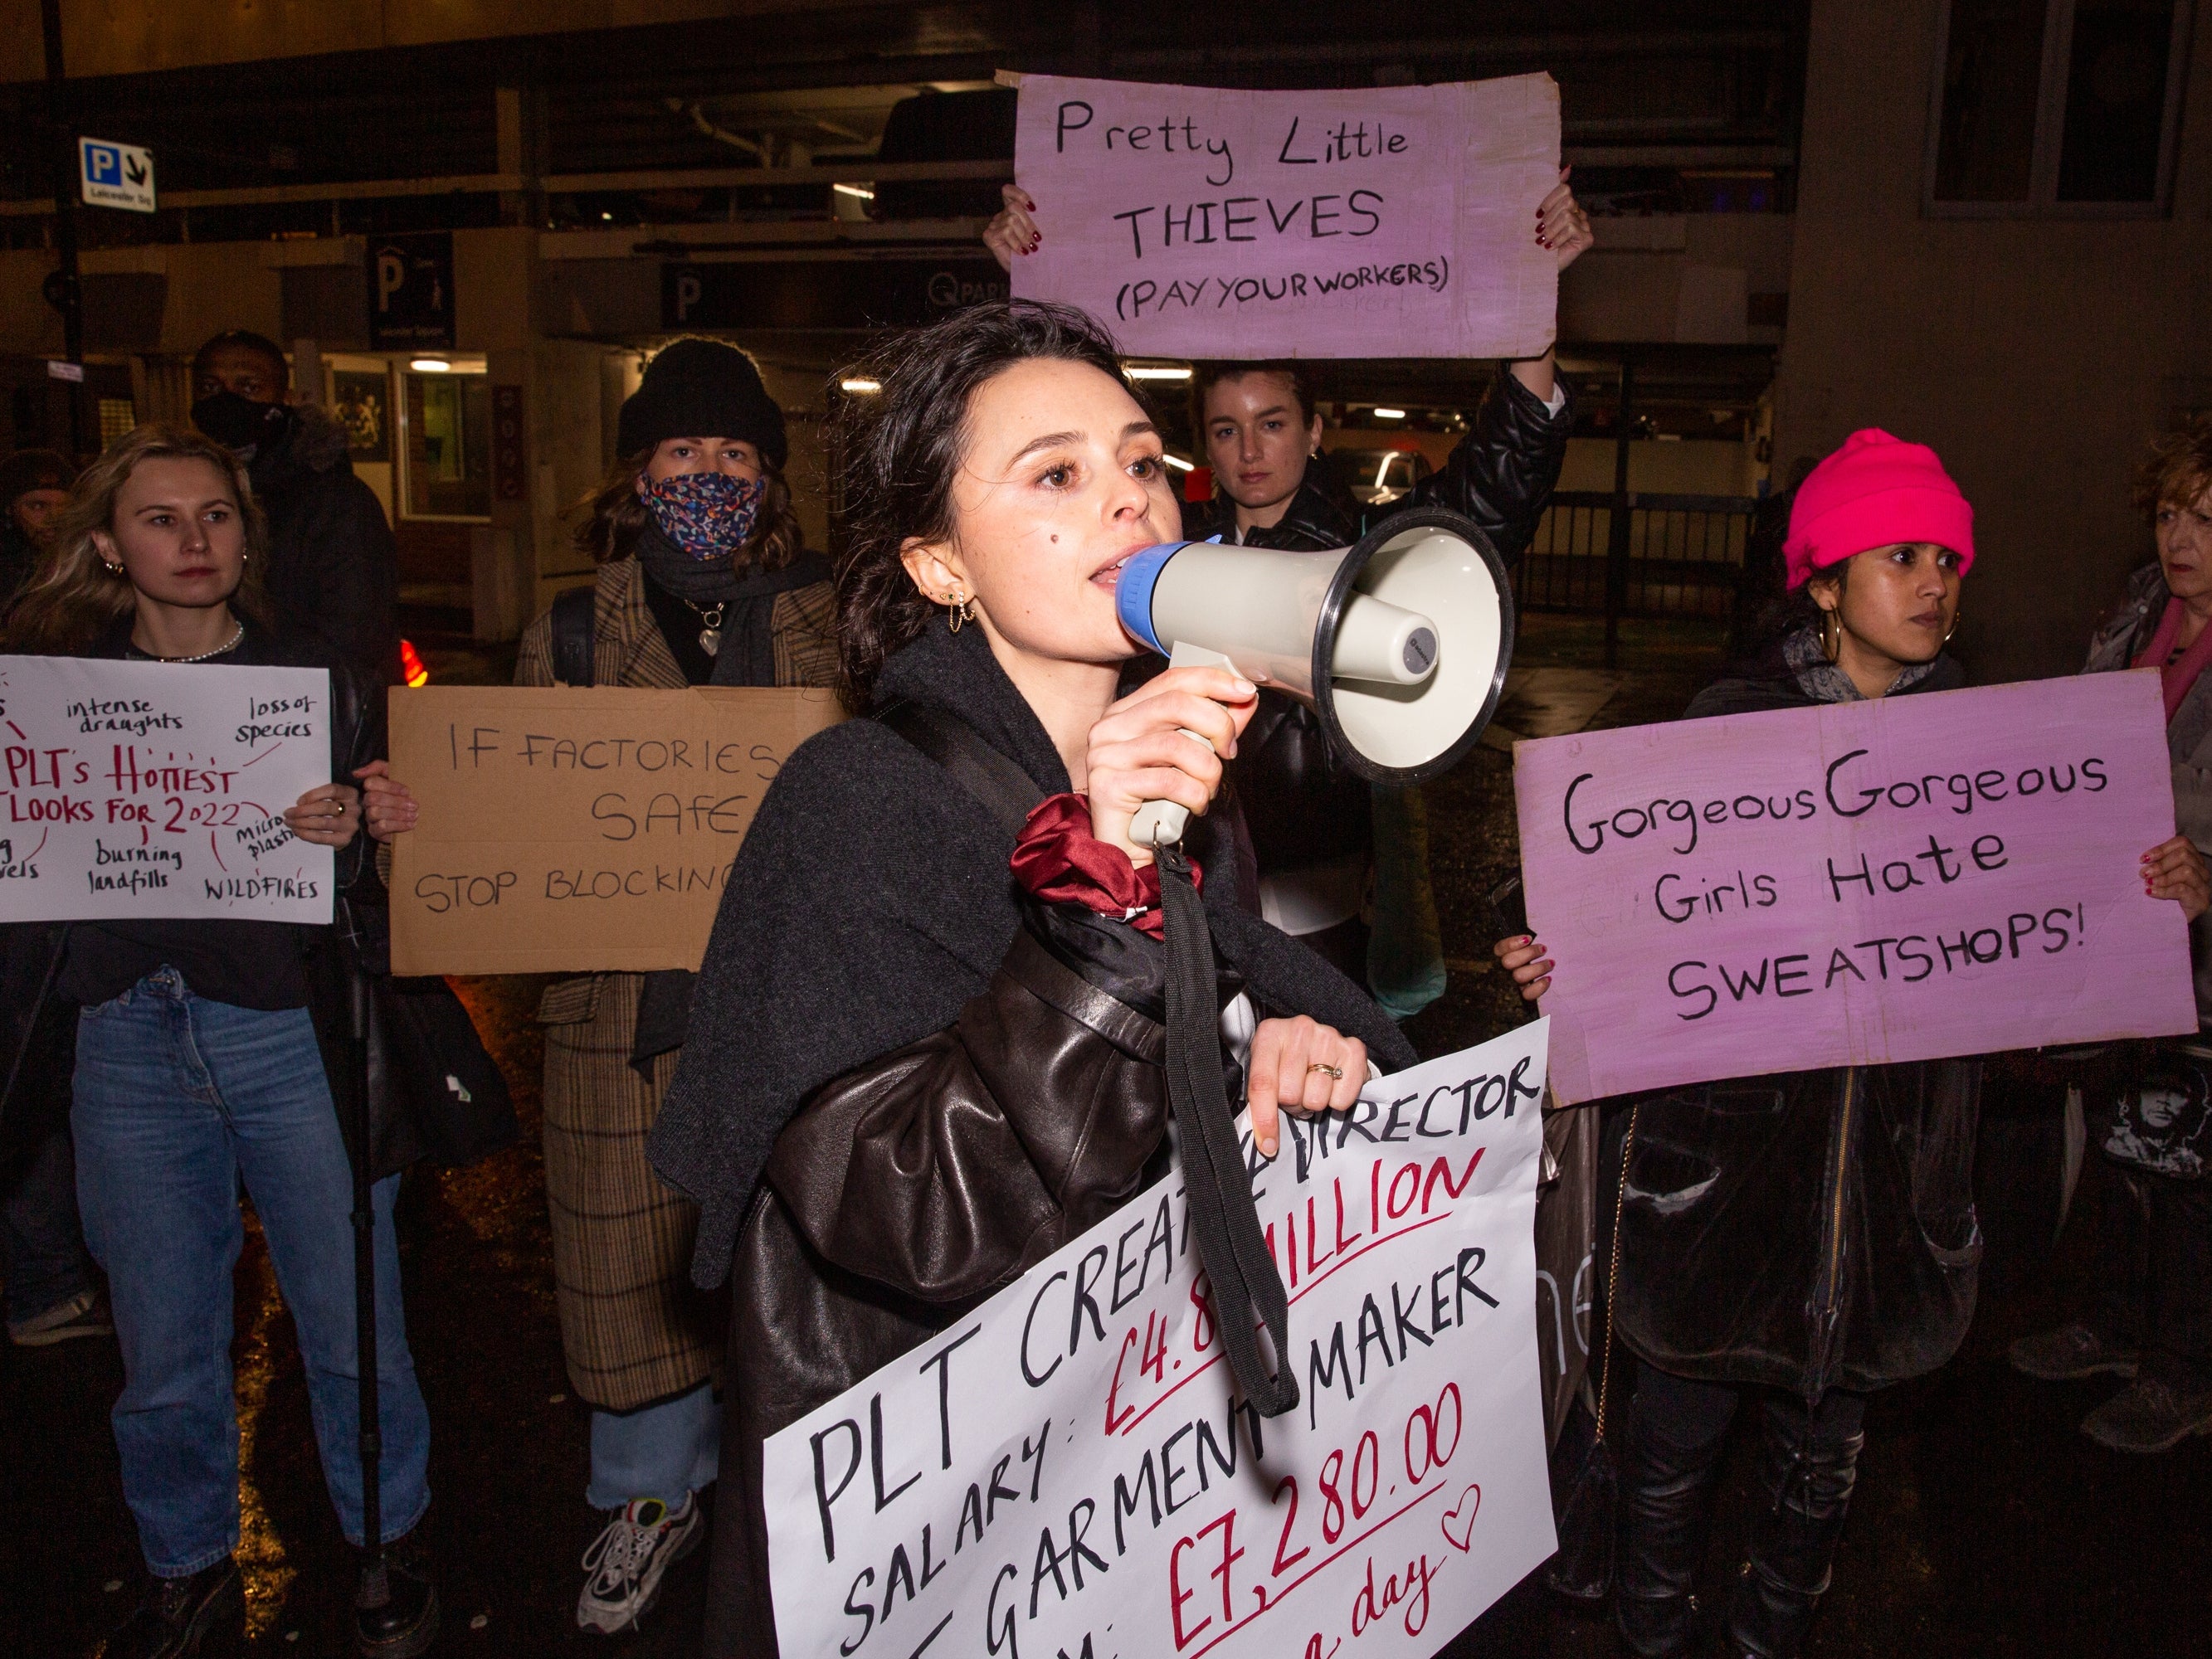 Venetia leads the protest outside the Pretty Little Thing show